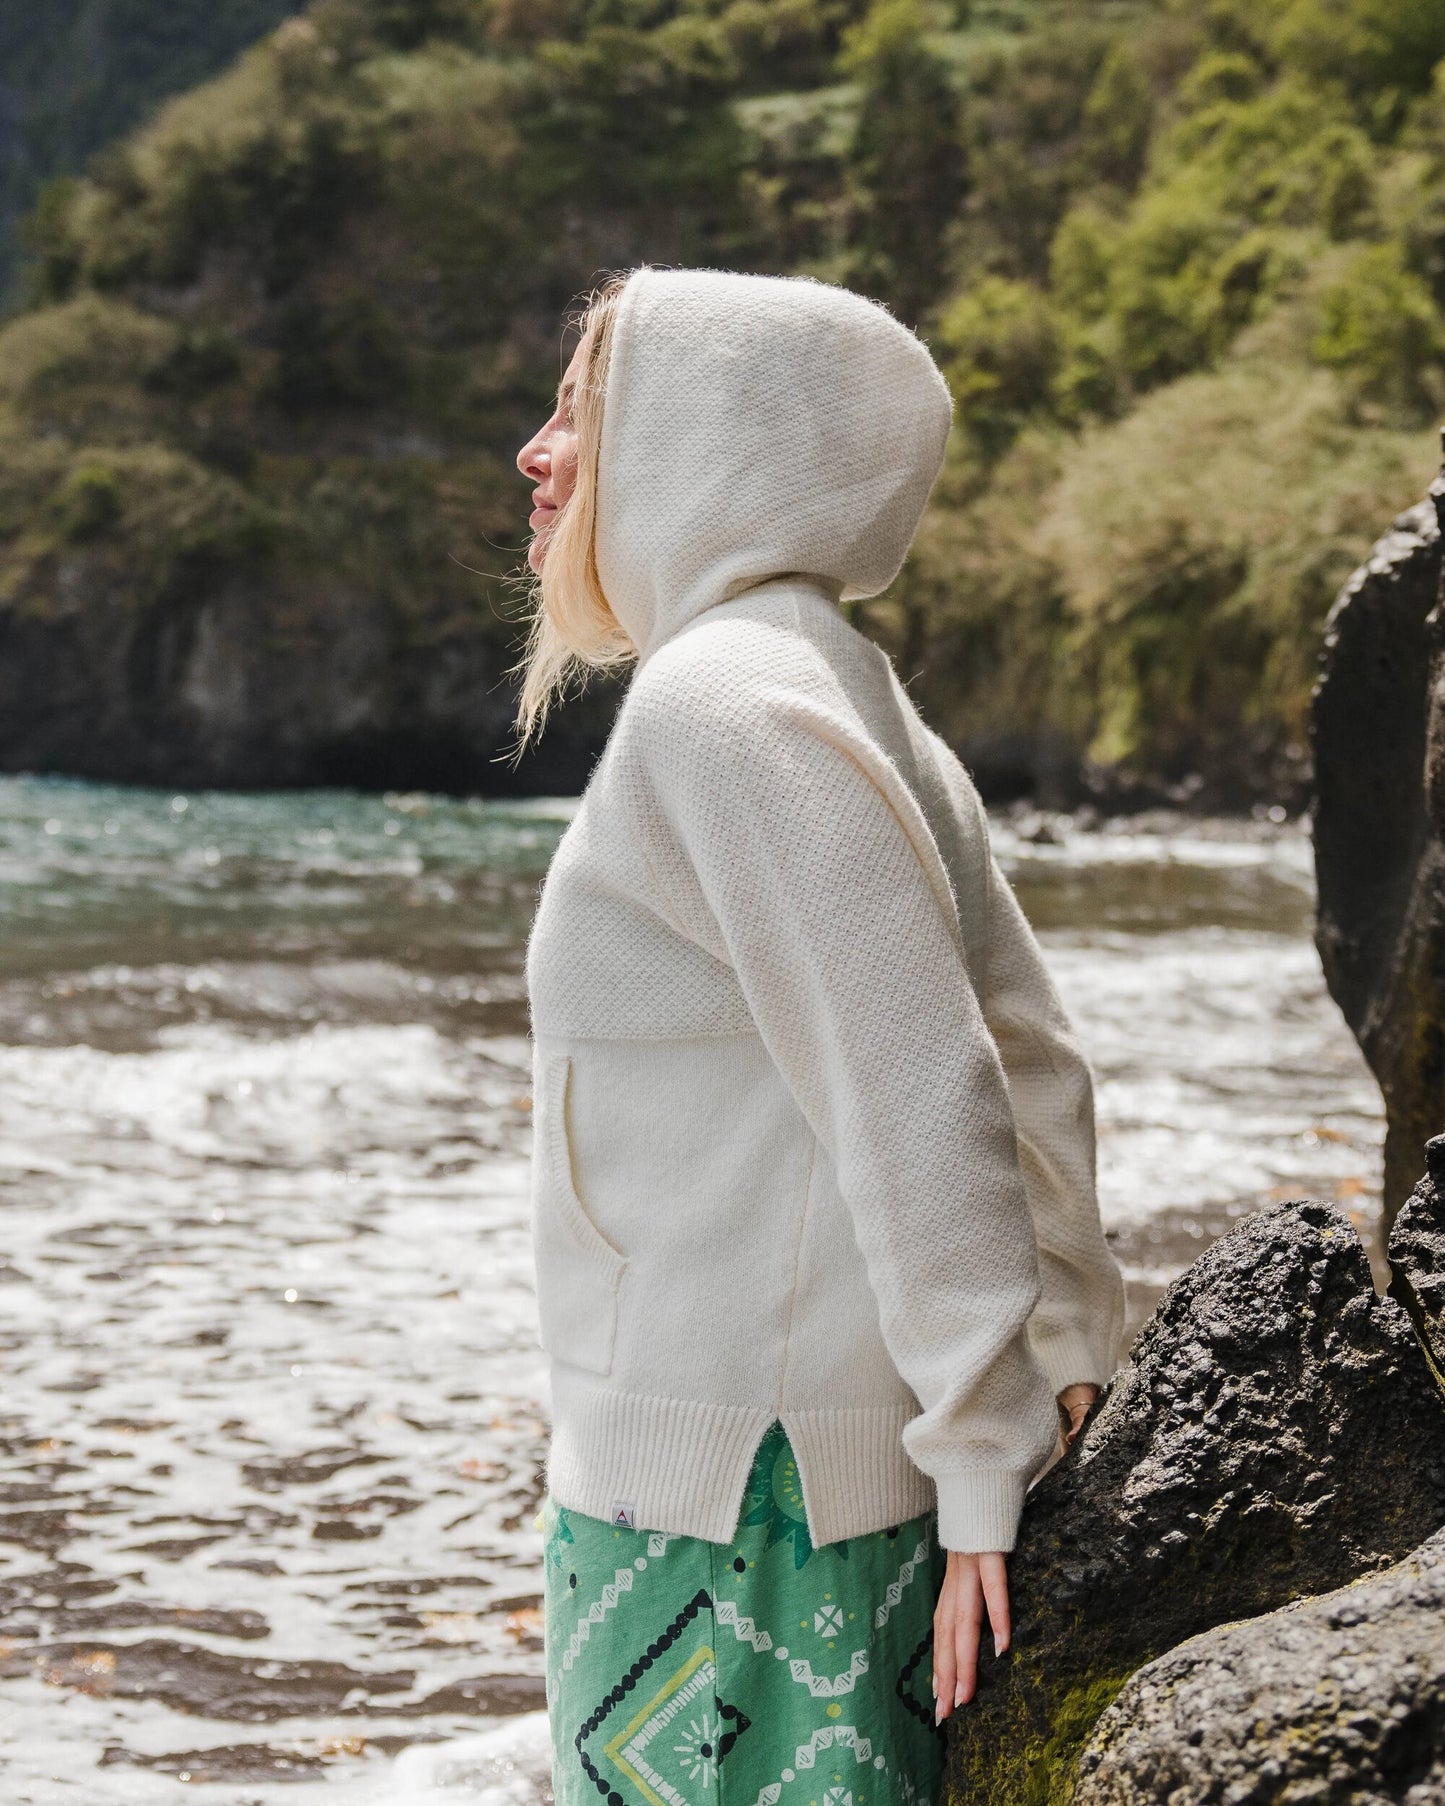 Cove Recycled Knitted Hoodie - Off White